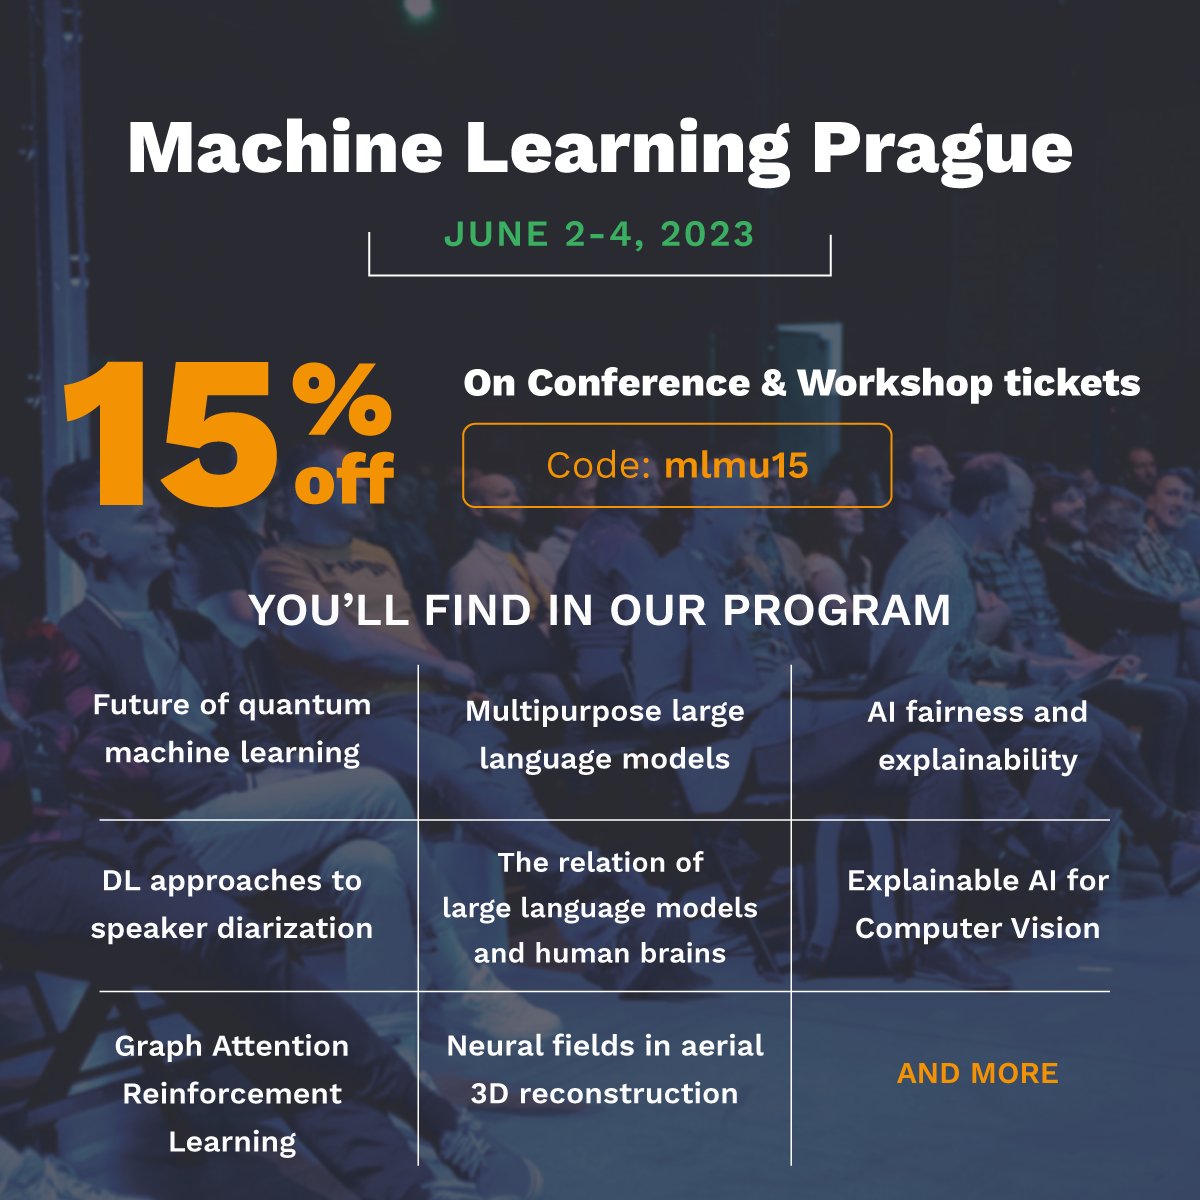 We are community partners of @MLPrague, the European most practical conference on #MachineLearning, #AI, and #DeepLearning applications. If you are interested in #mlprague, use this 15% discount code in your registration: mlmu15

Program at mlprague.com